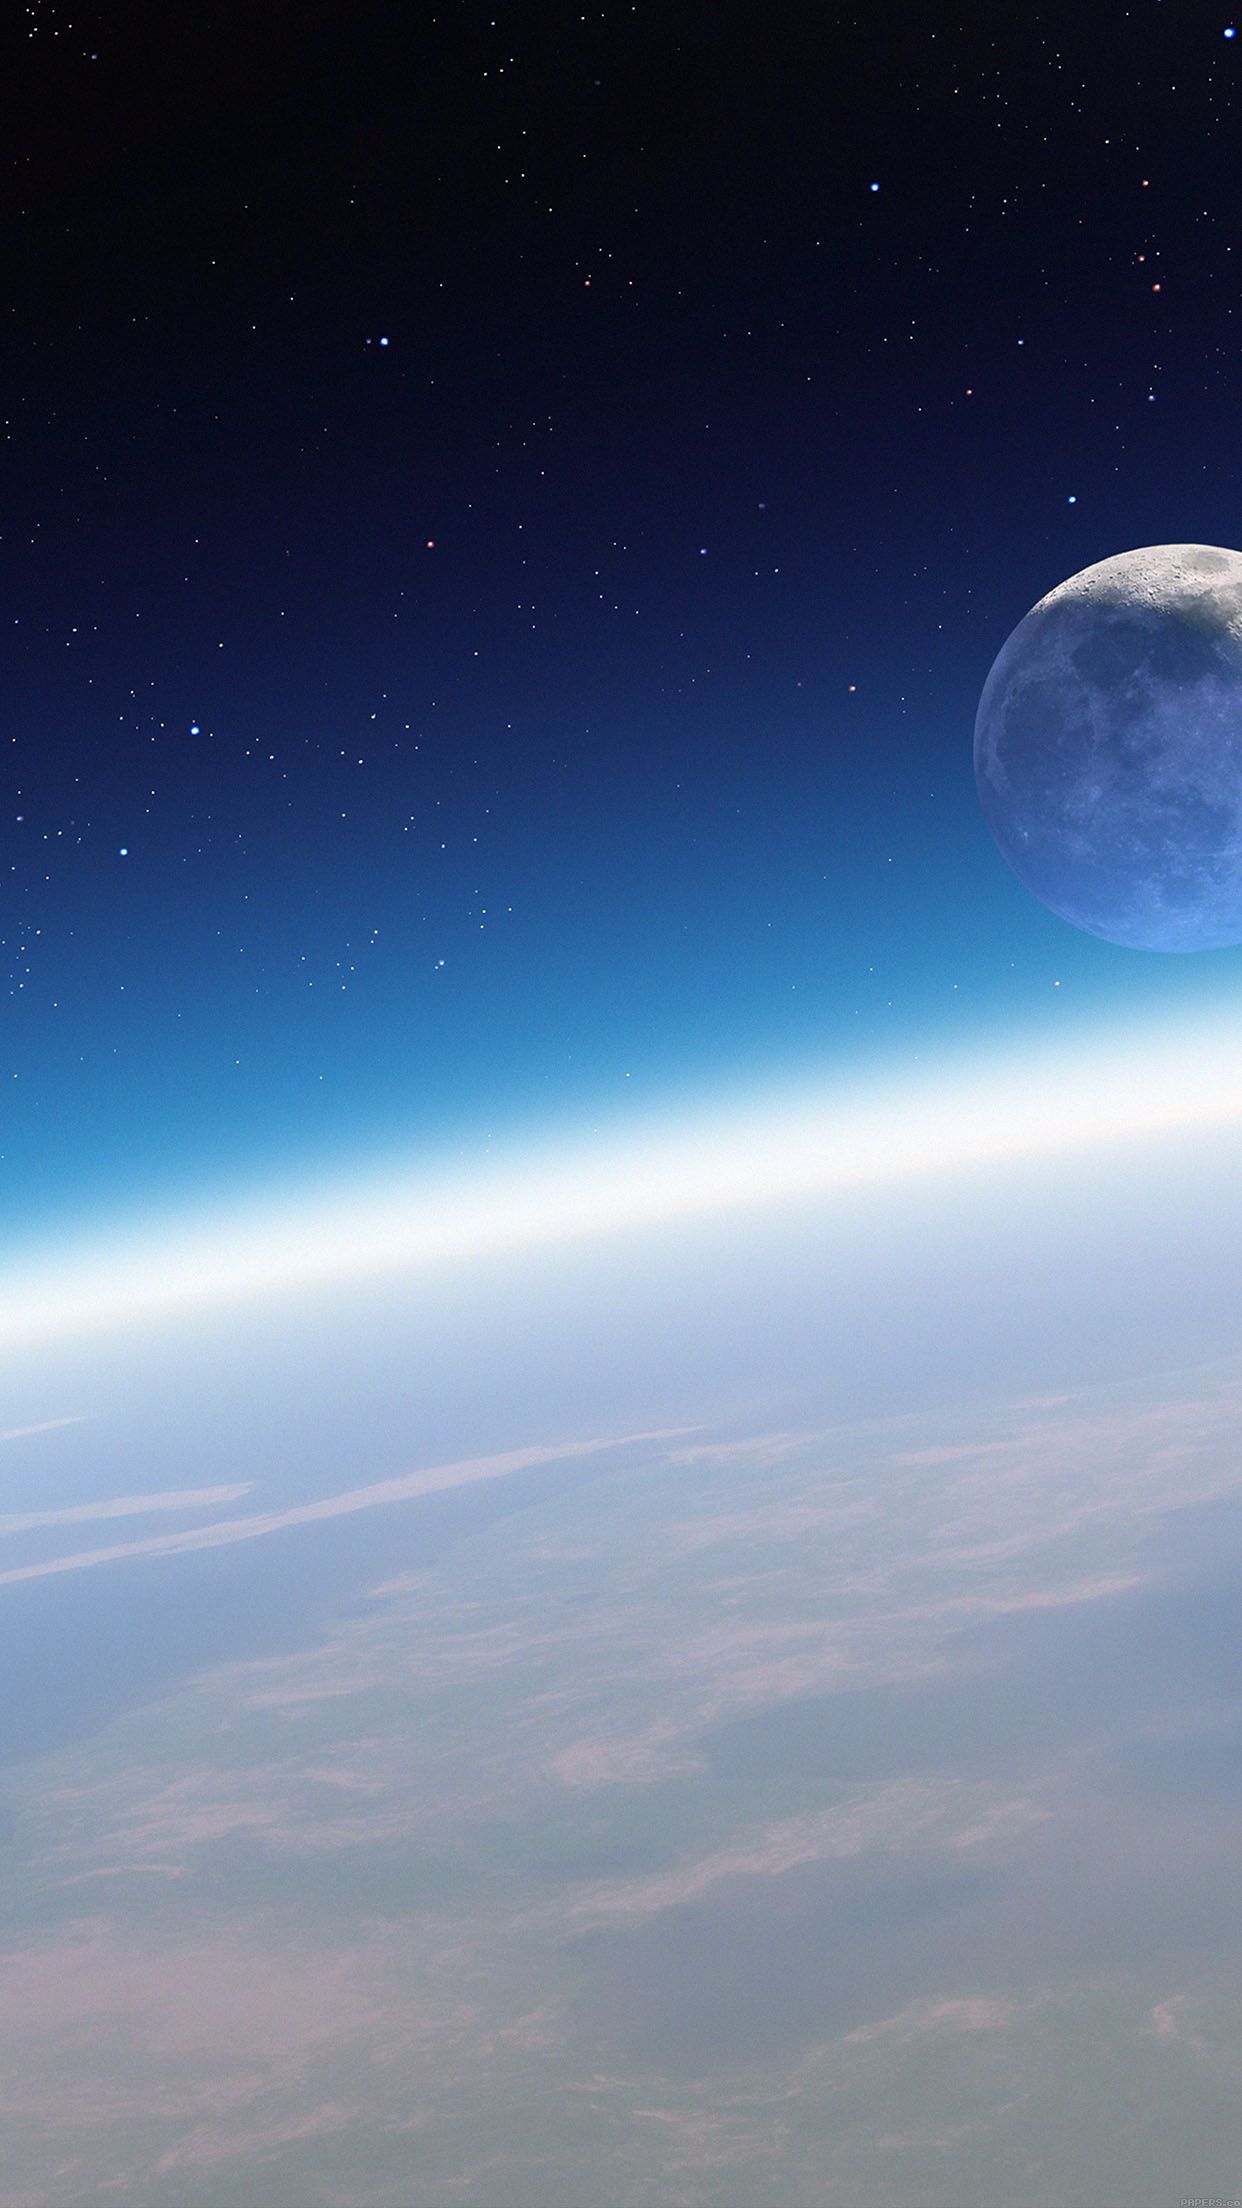 Earth Horizon In Space Smartphone Wallpaper From Space